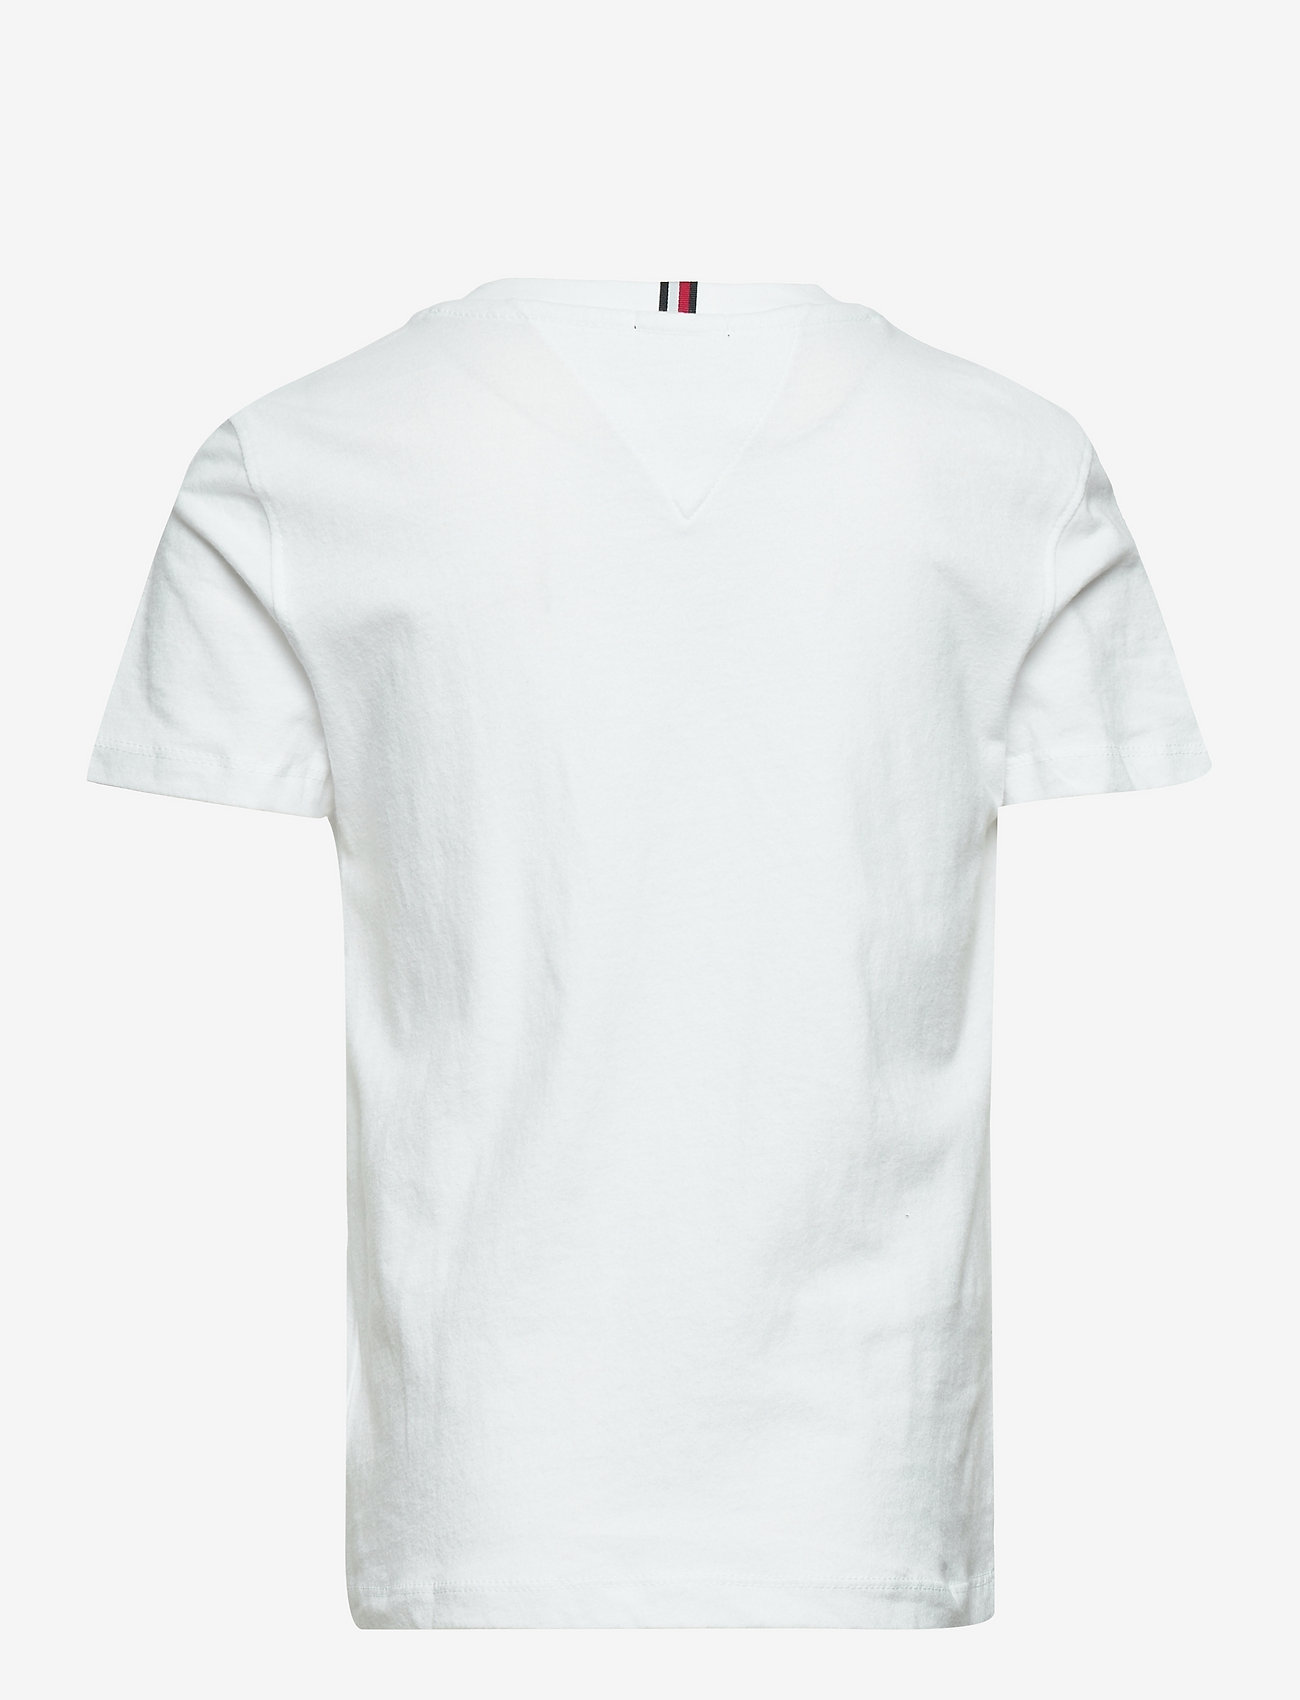 Tommy Hilfiger - TH LOGO TEE S/S - pattern short-sleeved t-shirt - white - 1